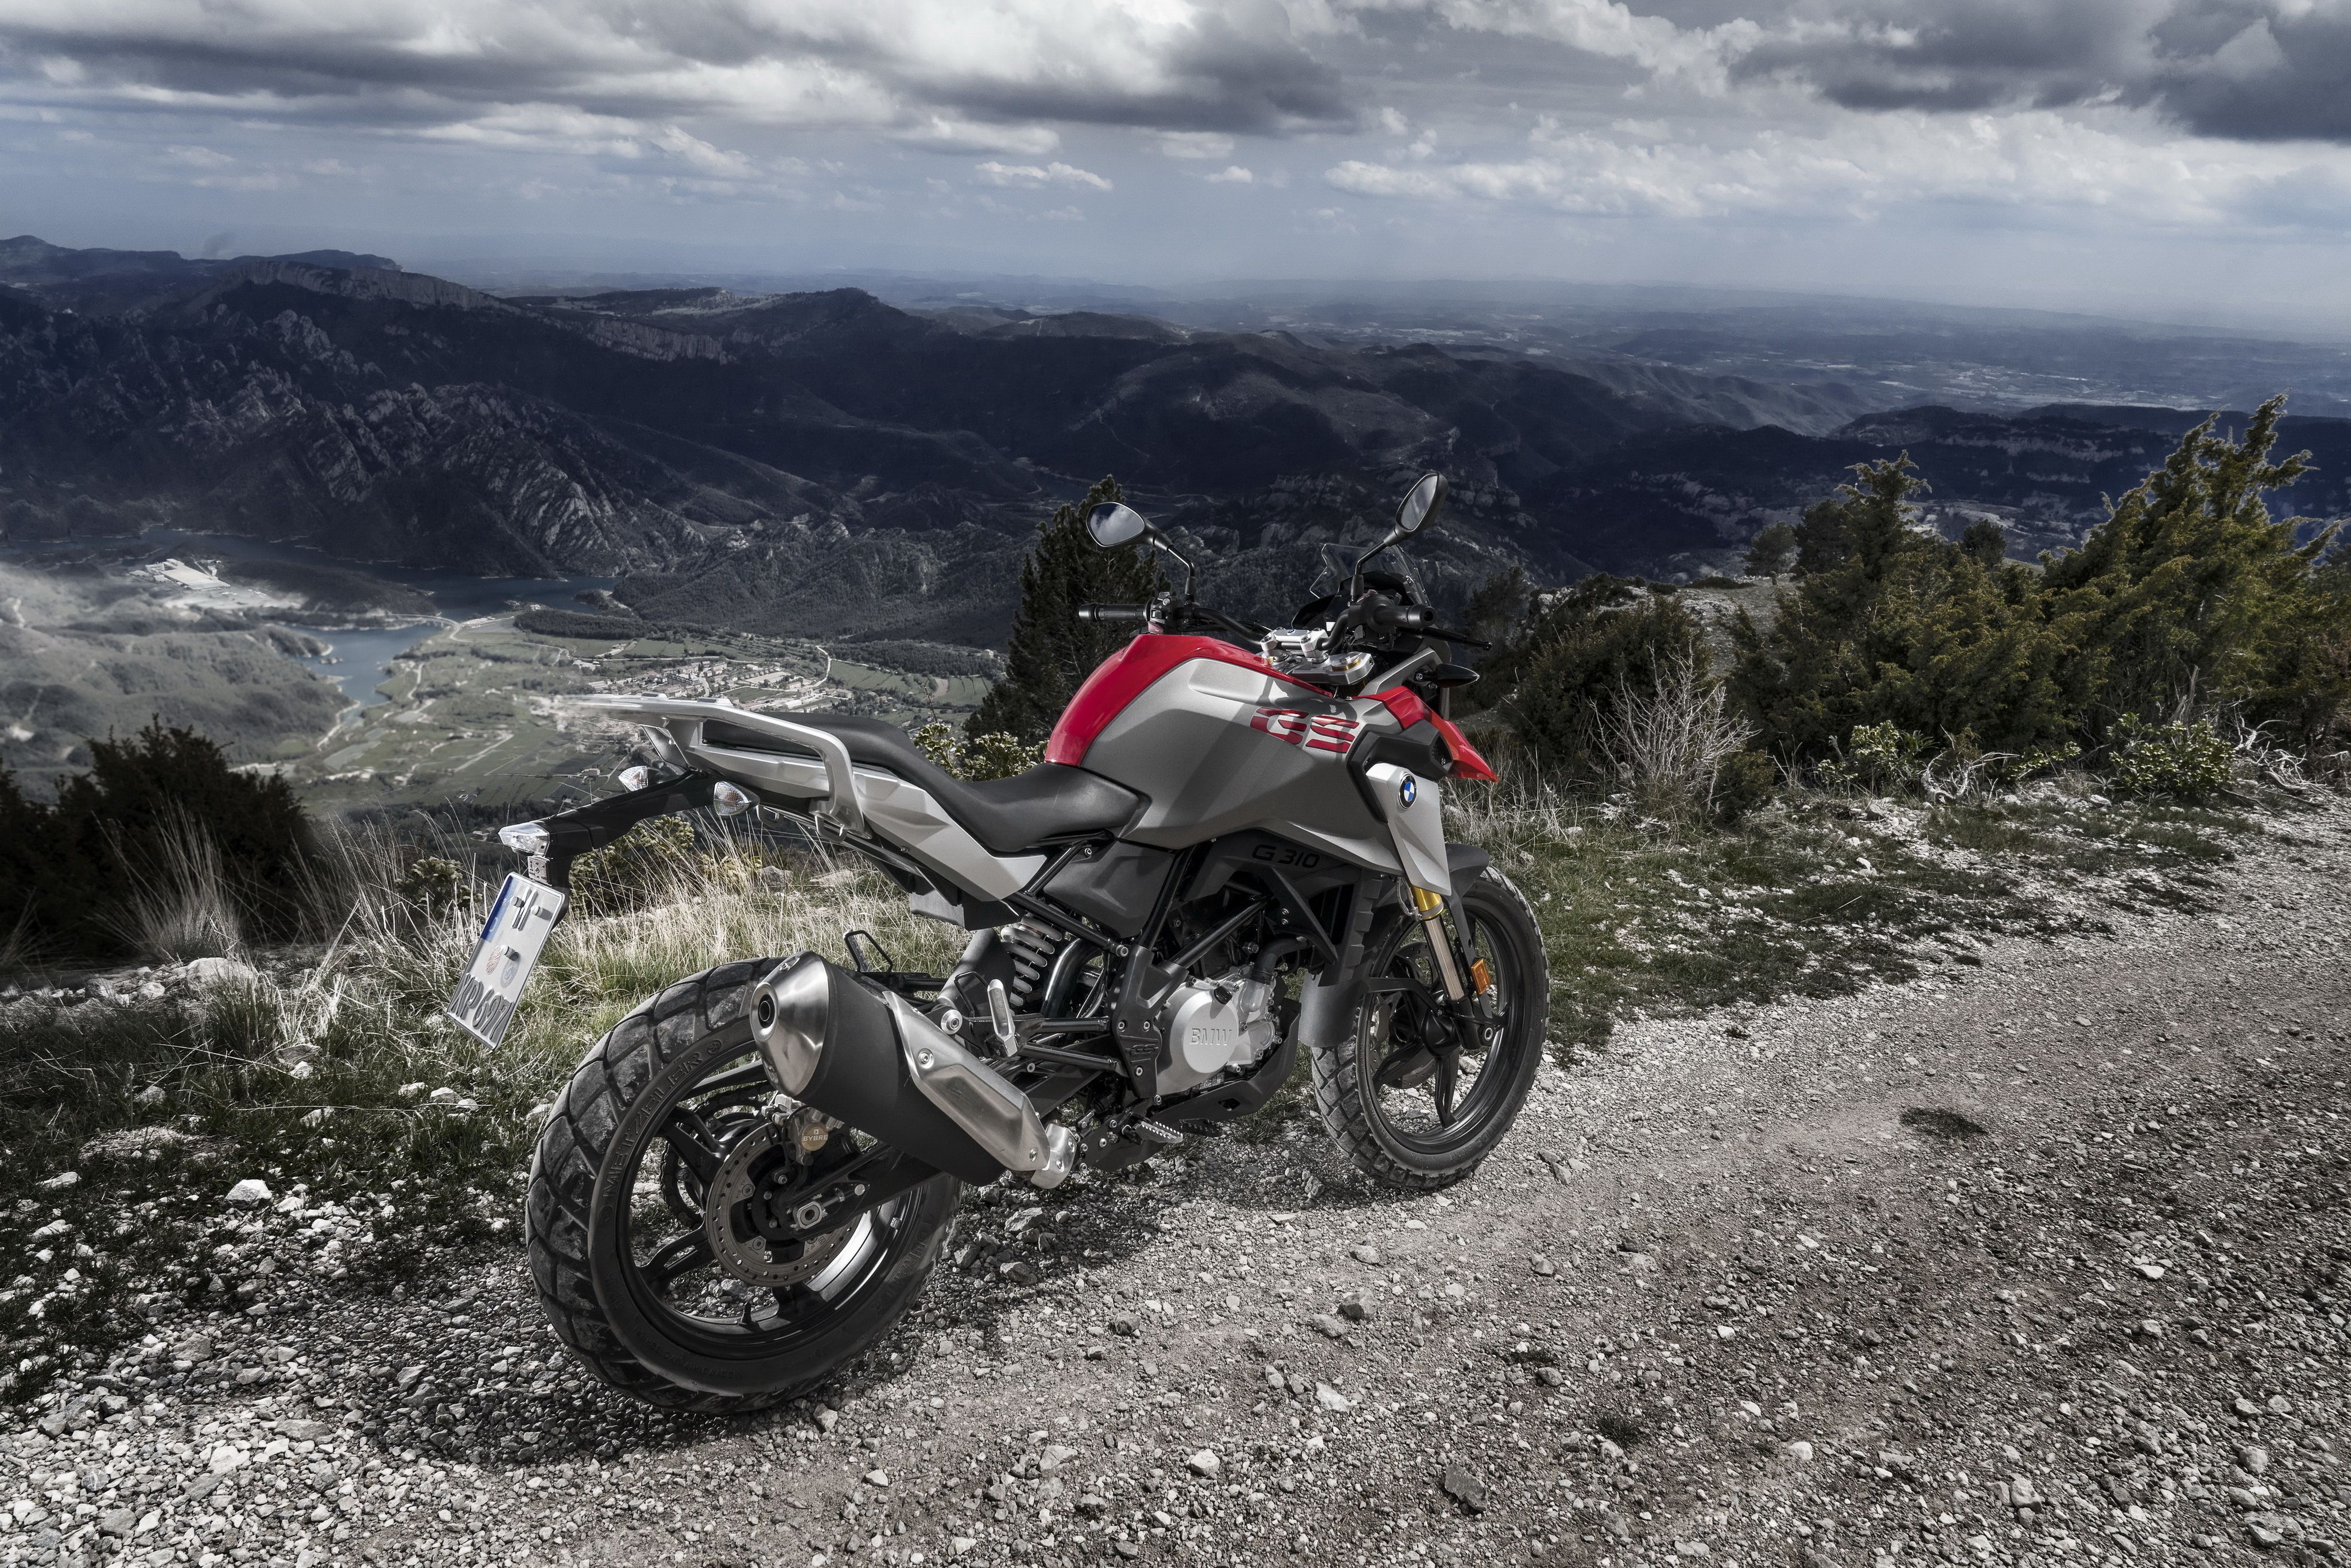 Wallpaper. Motorcycles. photo. picture. motorcycle, bmw, G 310 GS